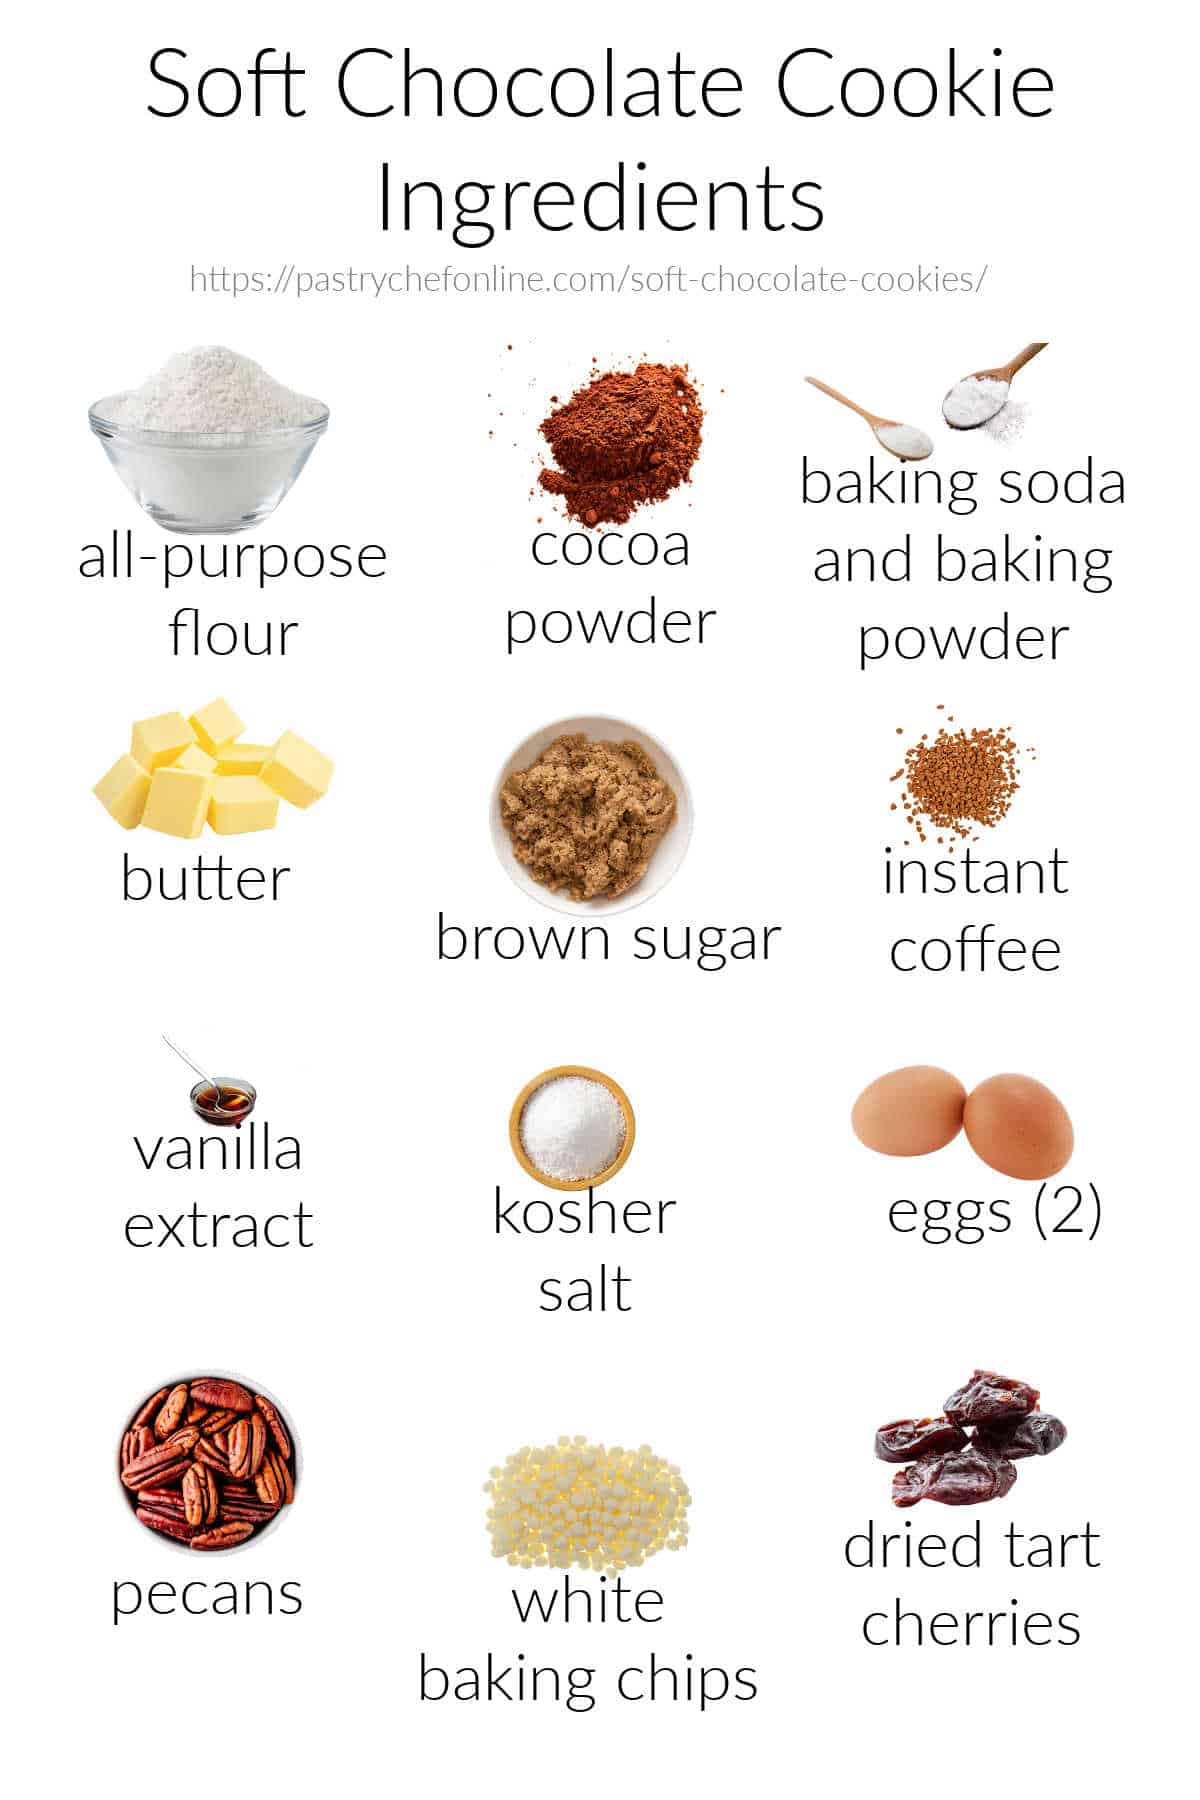 A collage of ingredients for making soft chocolate cookies with cherries, white chips, and pecans all shot on a white background and labeled.